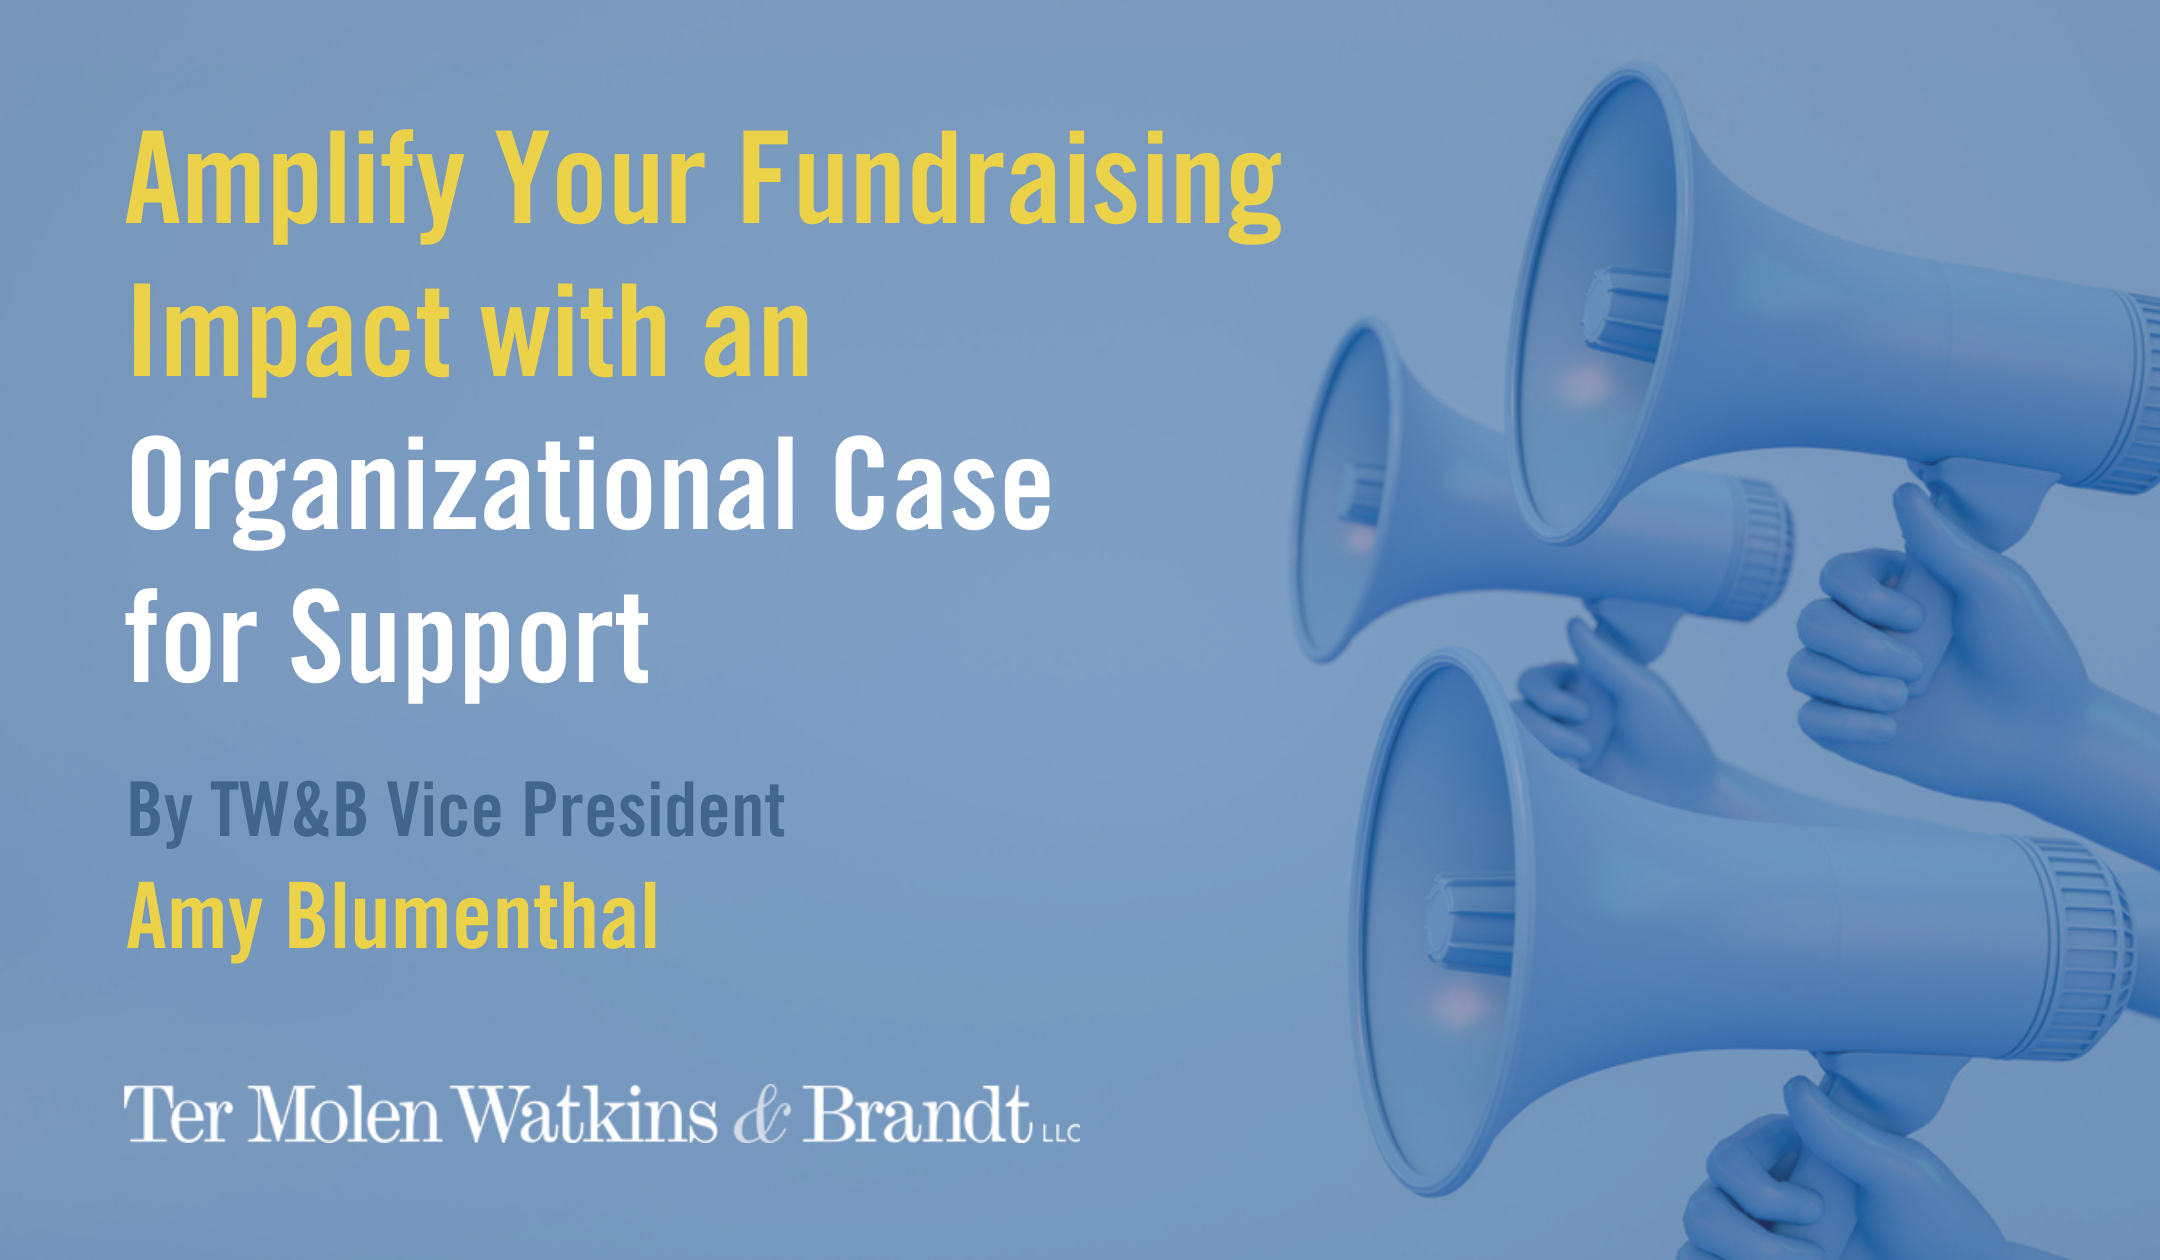 Amplify Your Fundraising Impact with an Organizational Case for Support